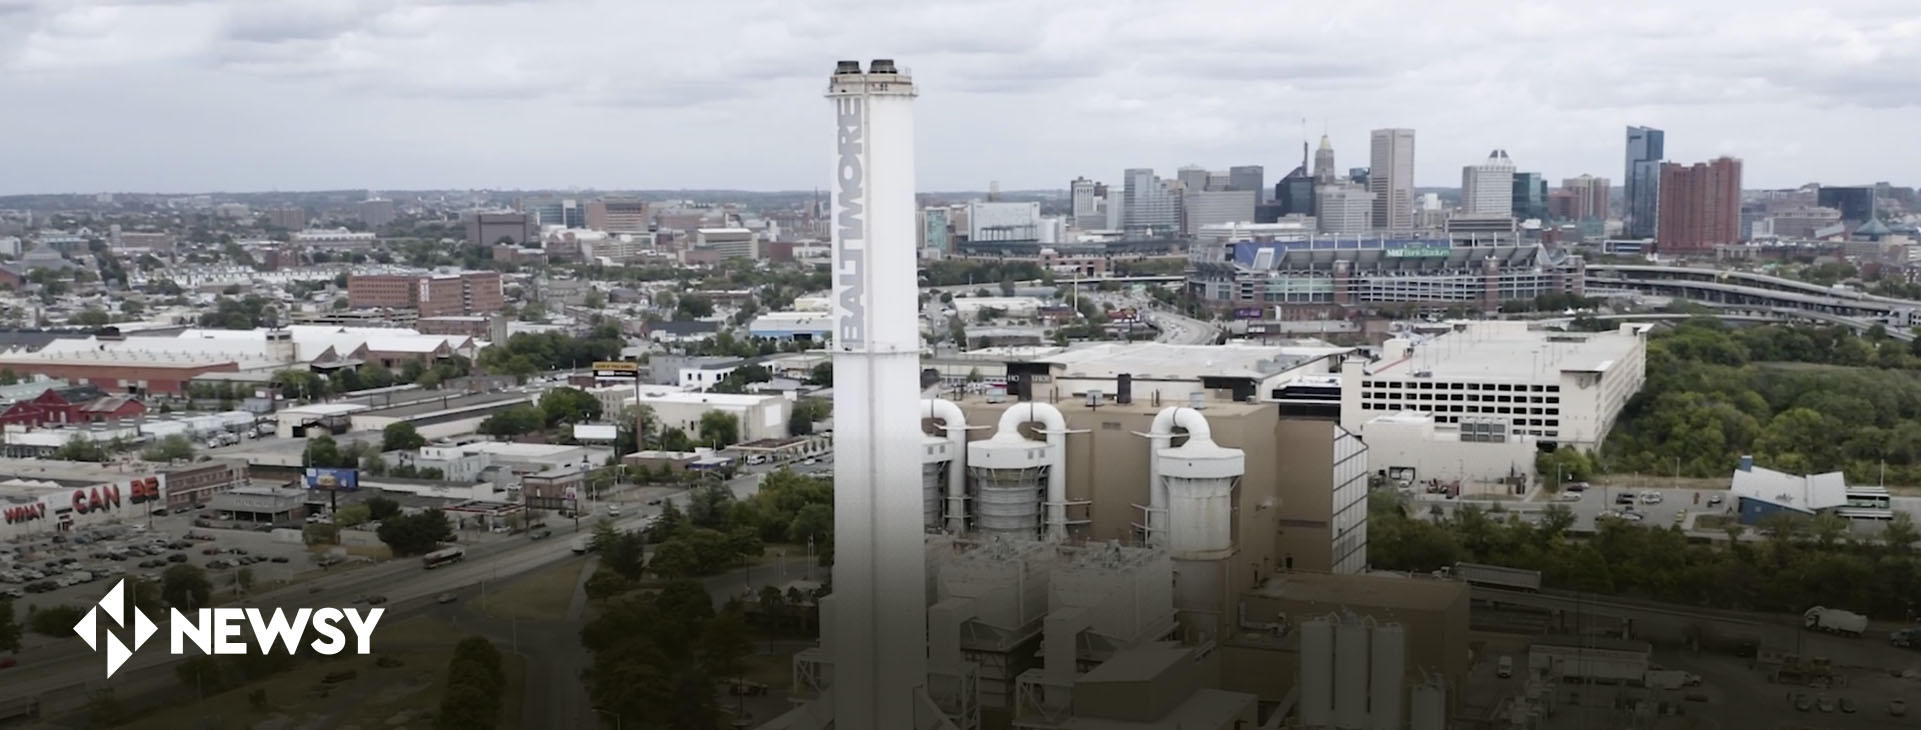 Across the U.S., waste incinerators have health impacts for communities living nearby. In Baltimore, there's a heated debate over what to do about it.